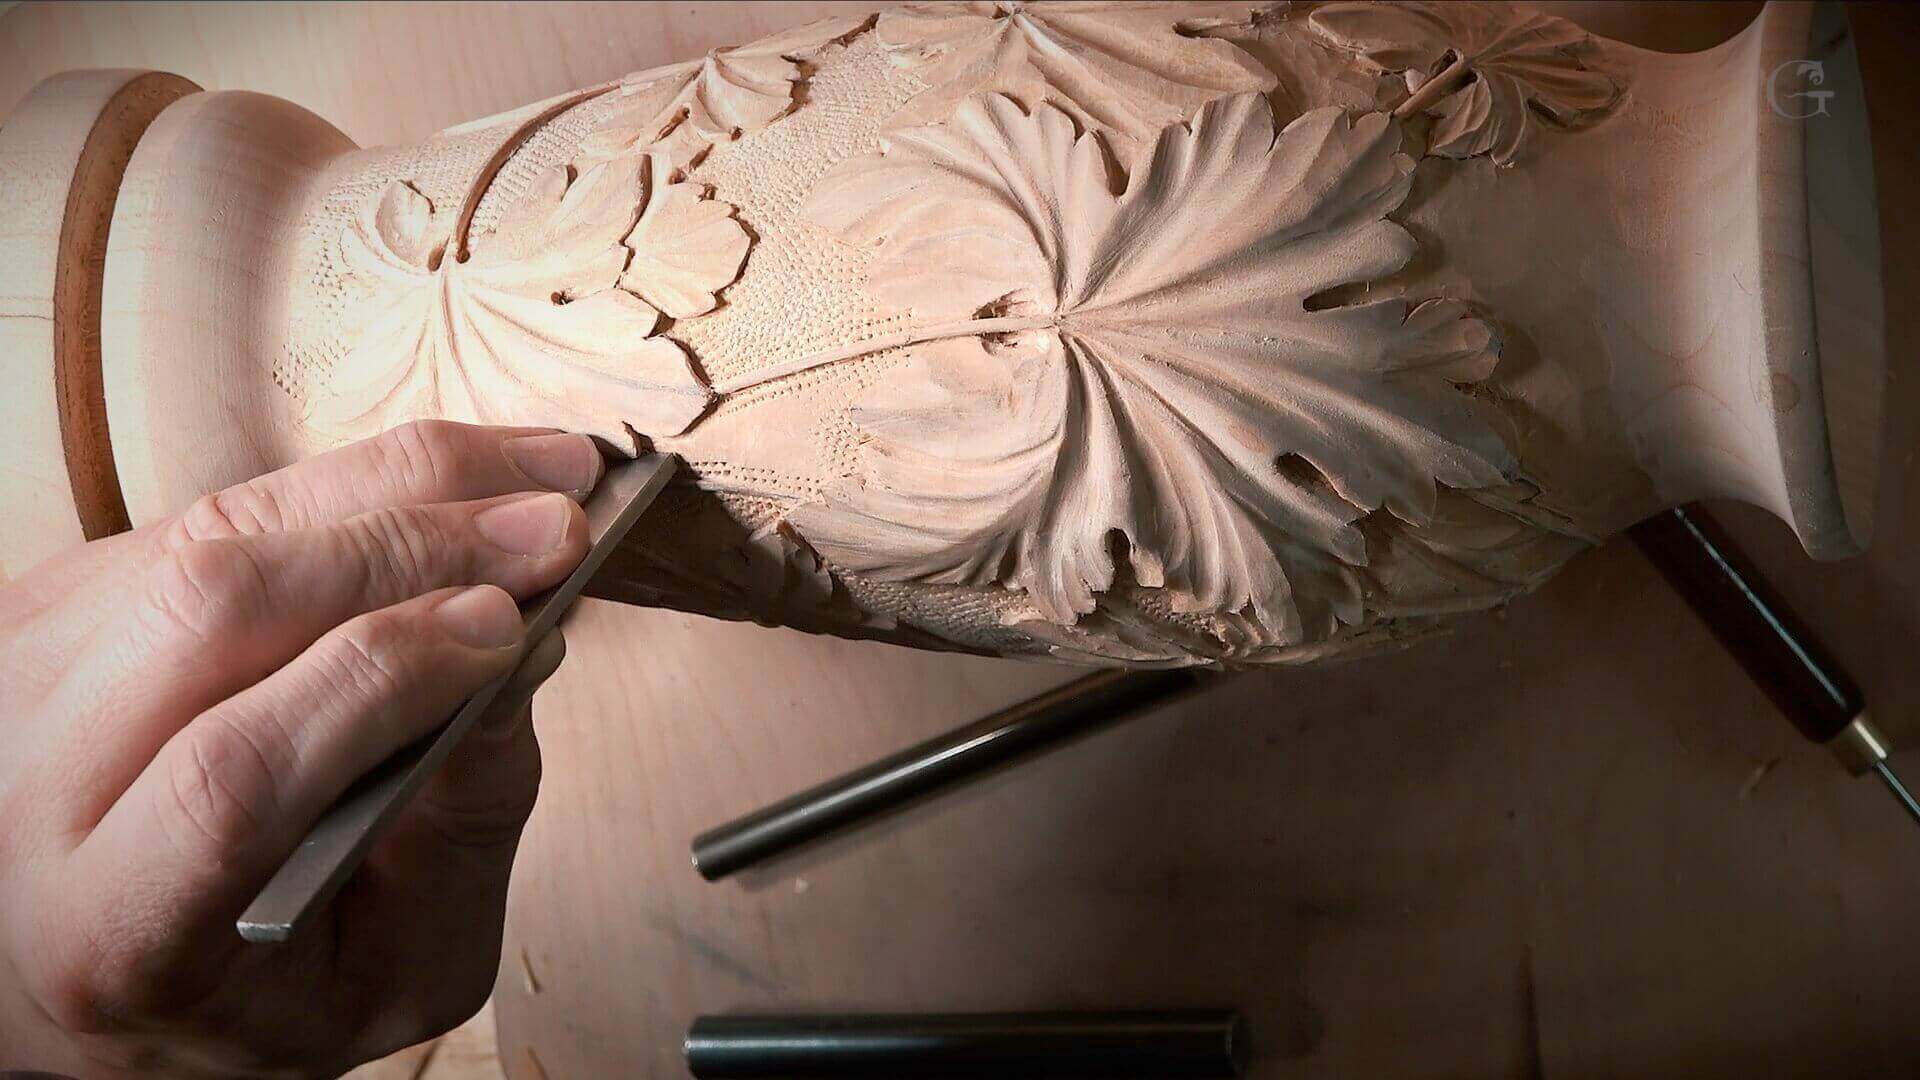 is wood carving hard to learn? 2